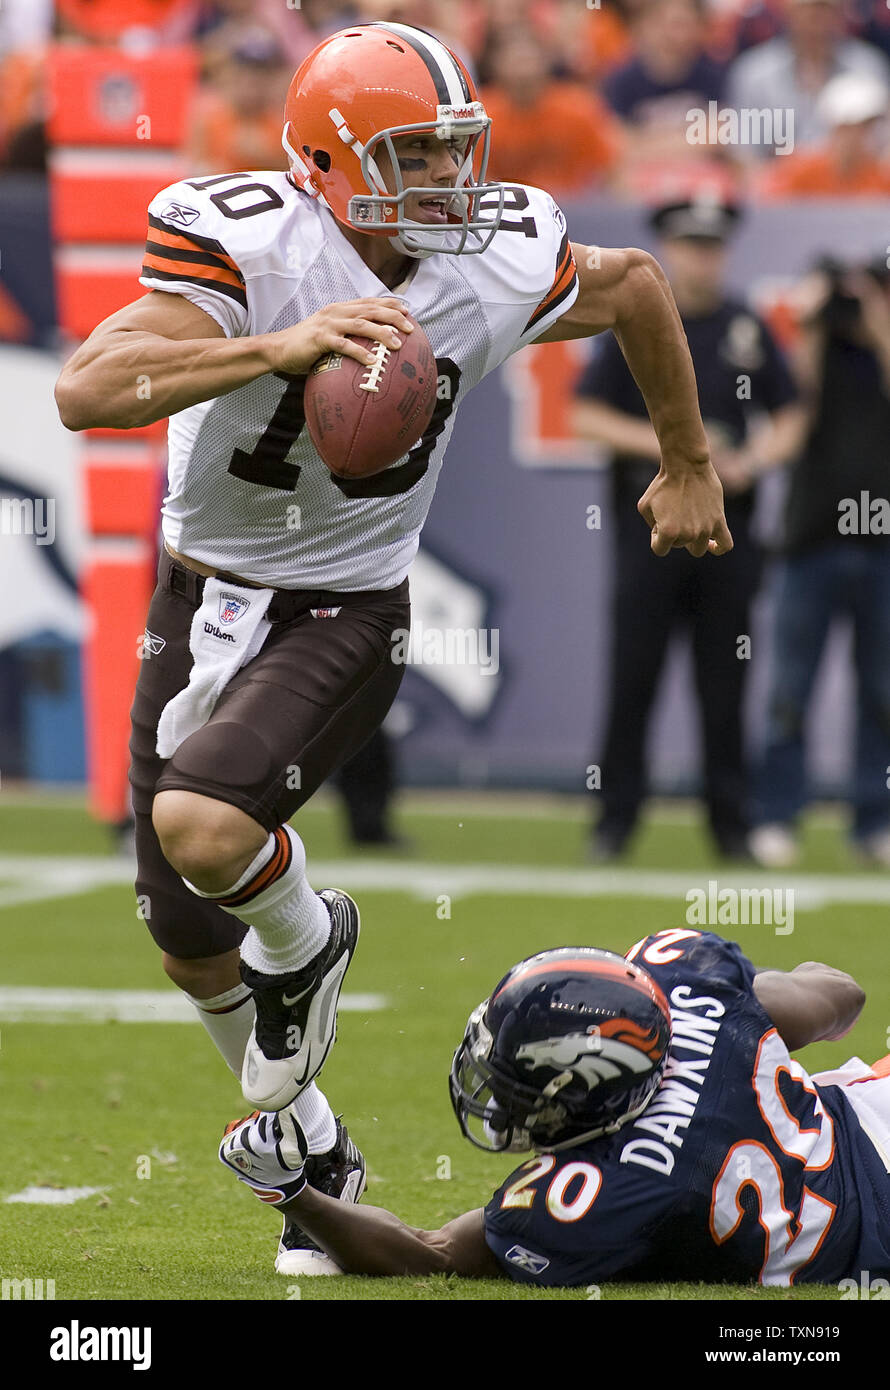 Cleveland Browns quarterback Brady Quinn (10) escapes a safety blitz during the first half against Denver Broncos Brian Dawkins at Invesco Field at Mile High in Denver on September 20, 2009.l  Denver defeated Cleveland 27-6 in their NFL home opener.   UPI/Gary C. Caskey... Stock Photo